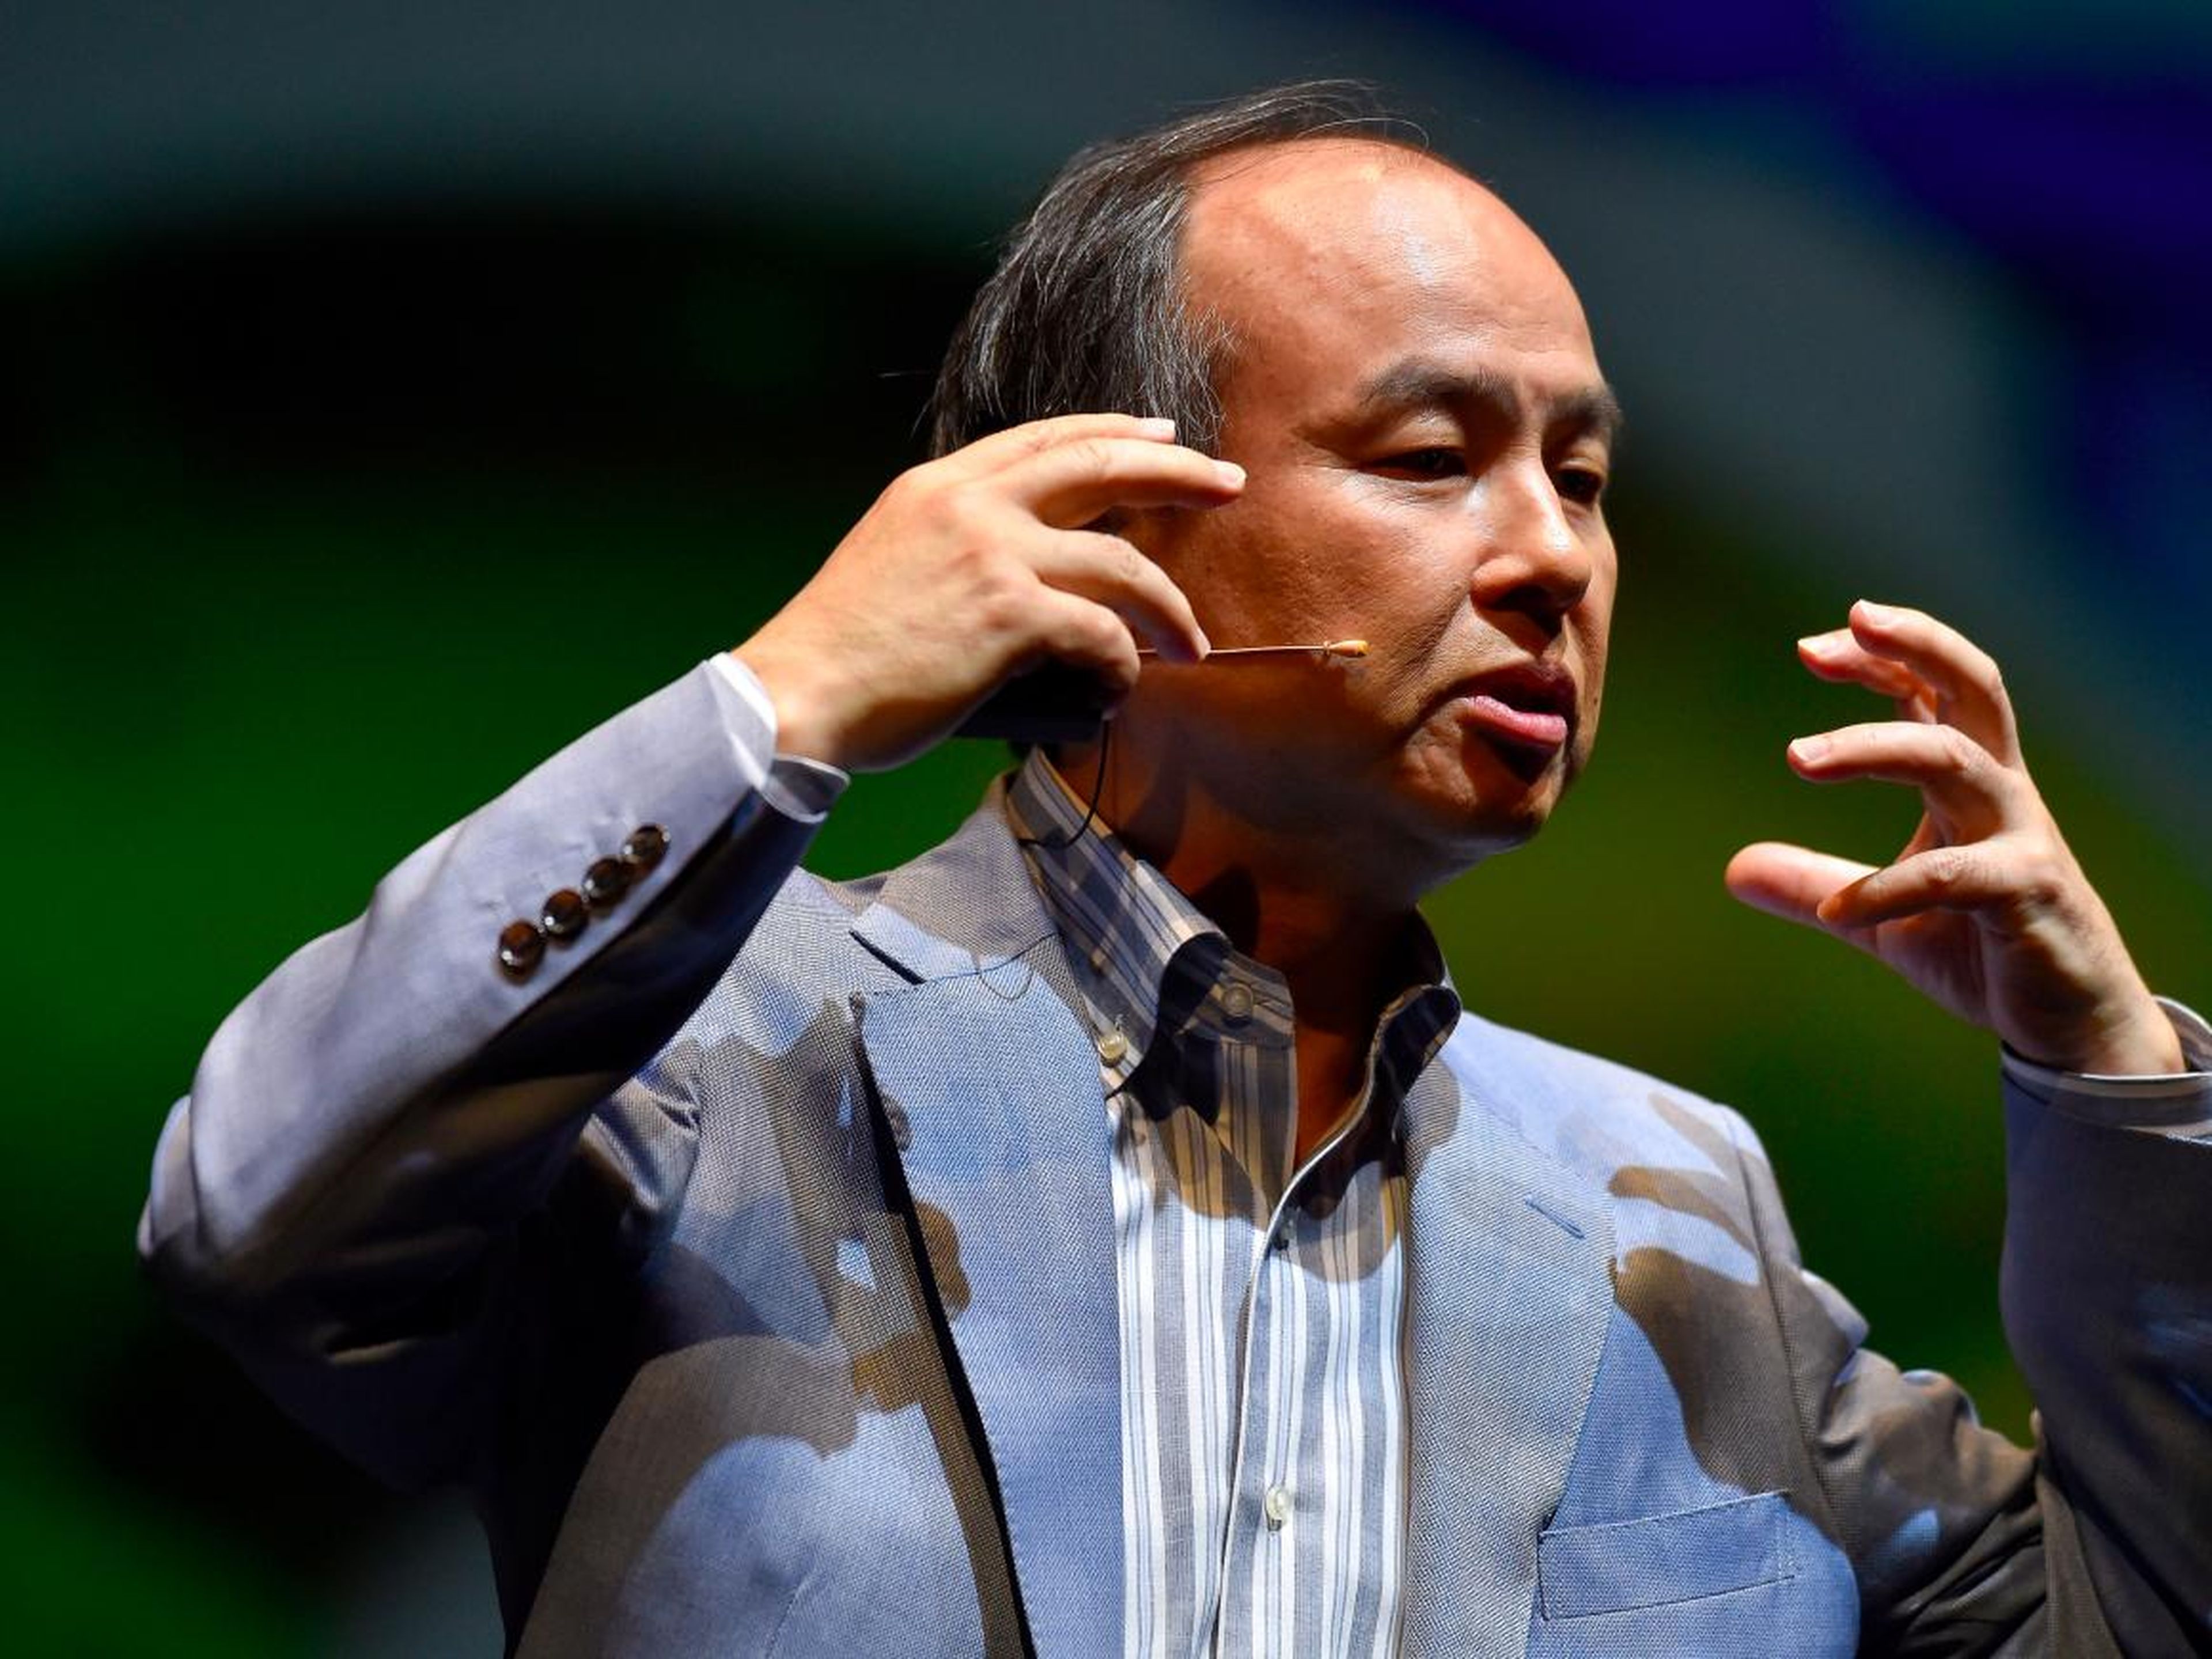 SoftBank CEO Masayoshi Son. SoftBank would go on to take a big stake in Uber, which runs a competitor to Deliveroo, Uber Eats.